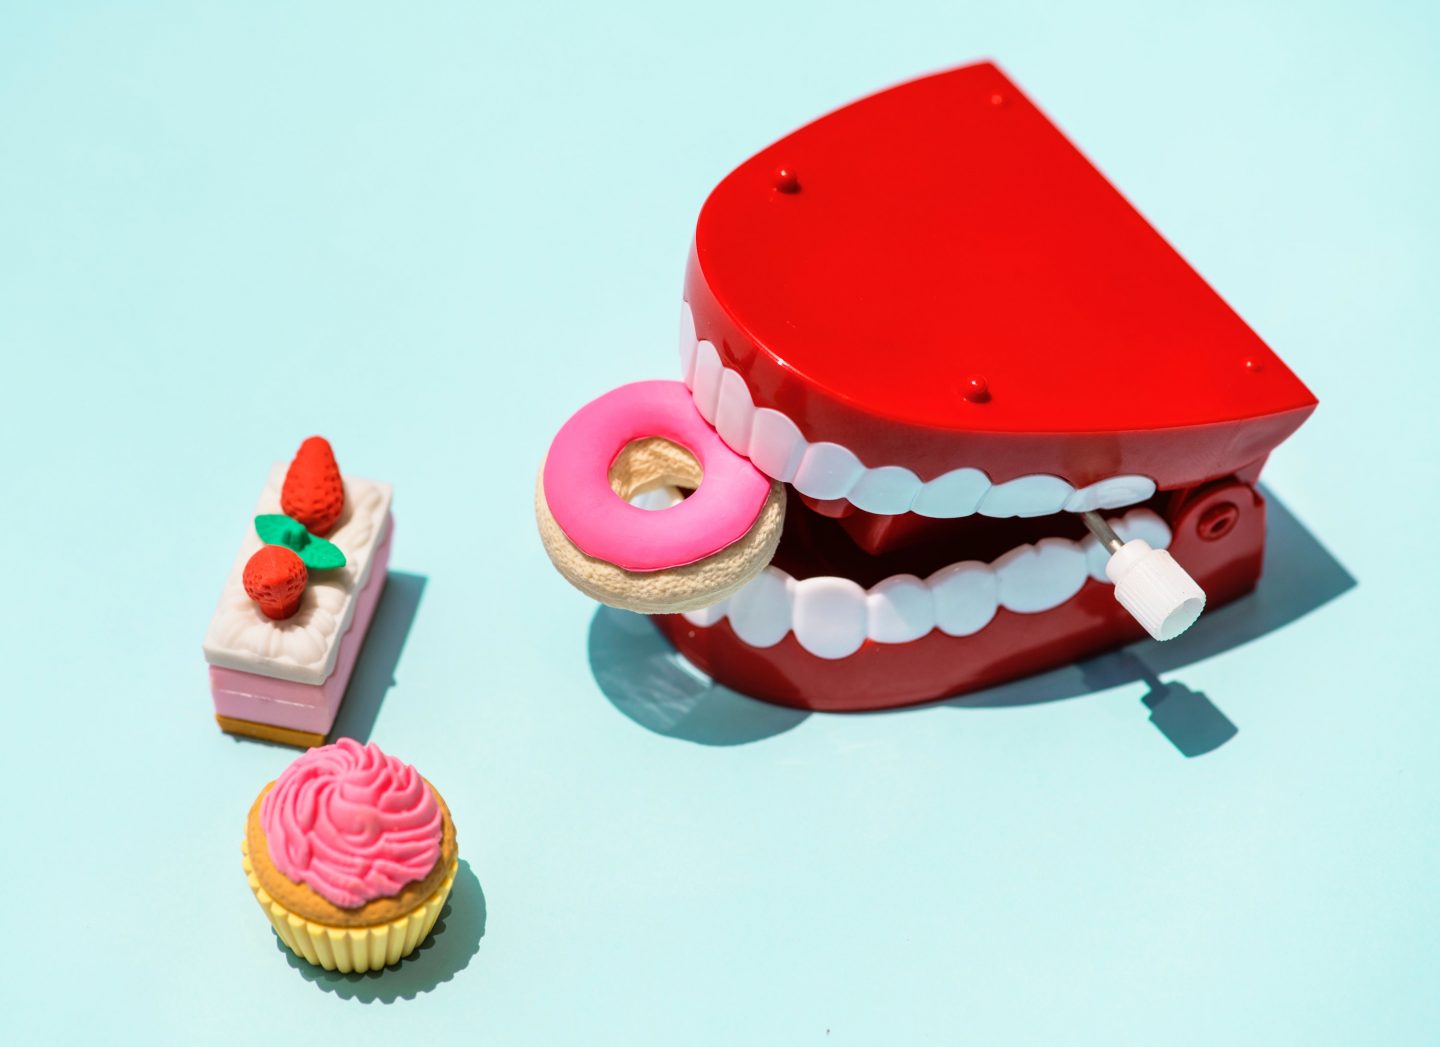 A wind up toy set of false teeth. They're holding a mini toy donut. There are two other tiny toy sweet treats next to the teeth. They're all set on a blue background.